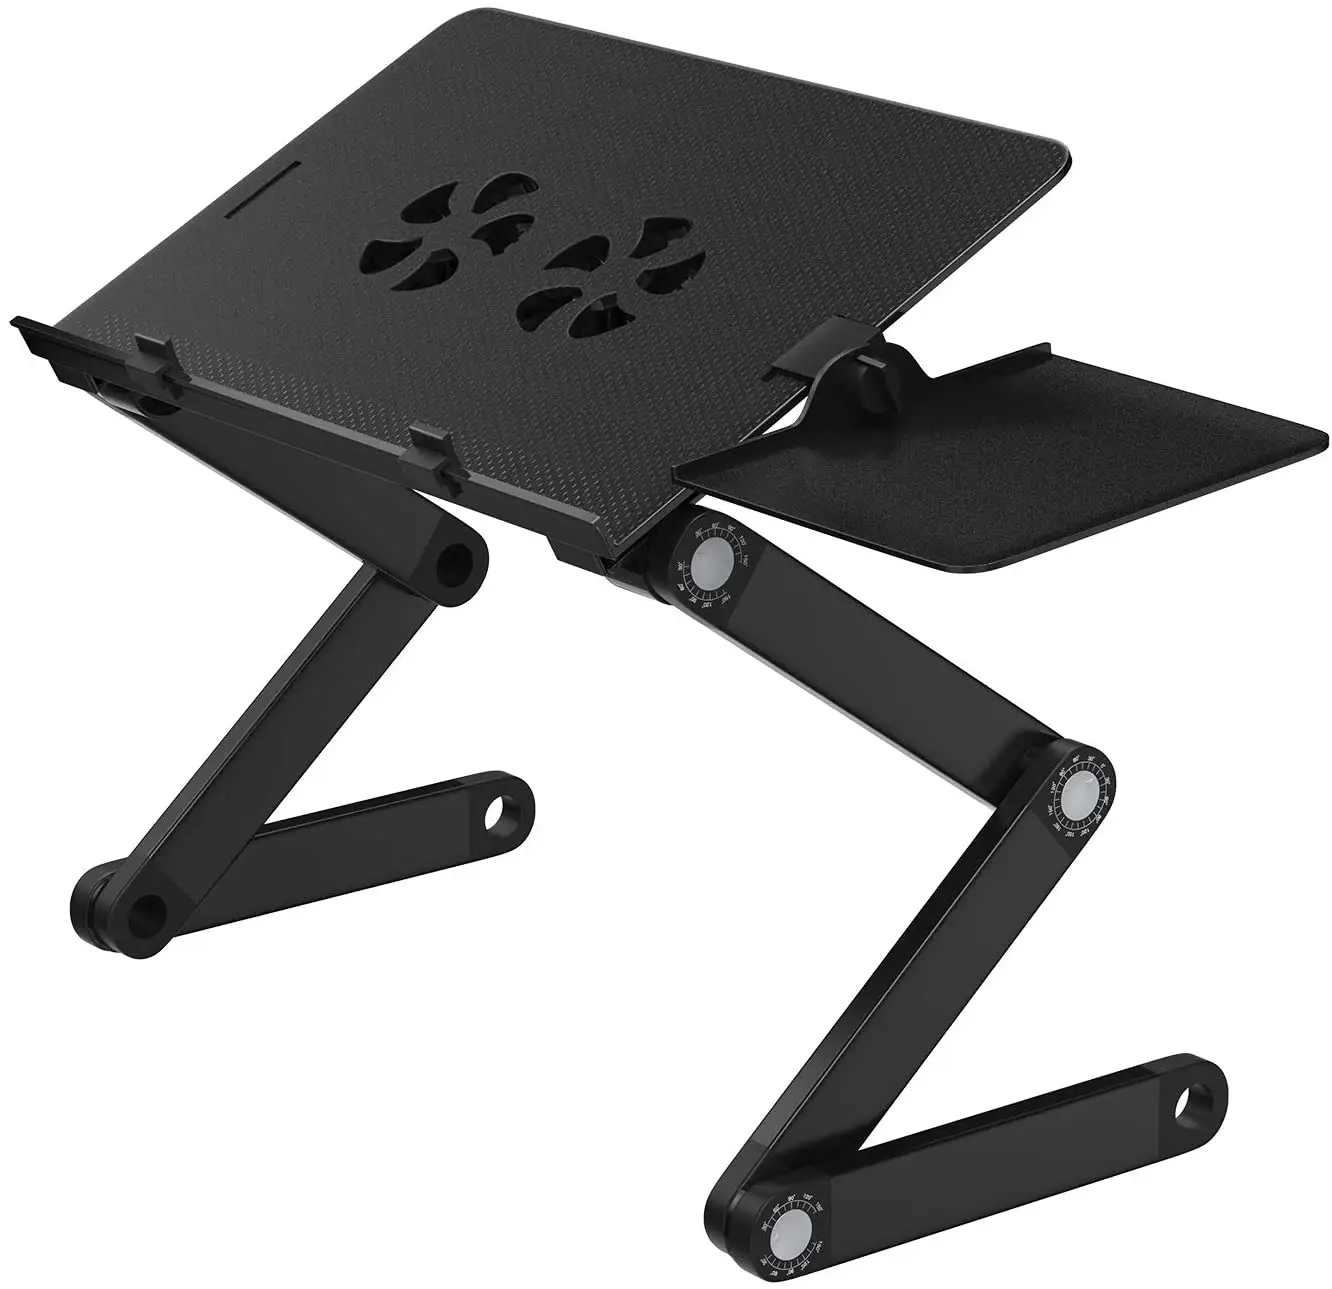 Office Aluminium Desk Height Adjustment Foldable Adjustable Black Laptop Stand With Mouse Board USB Cooling Fans